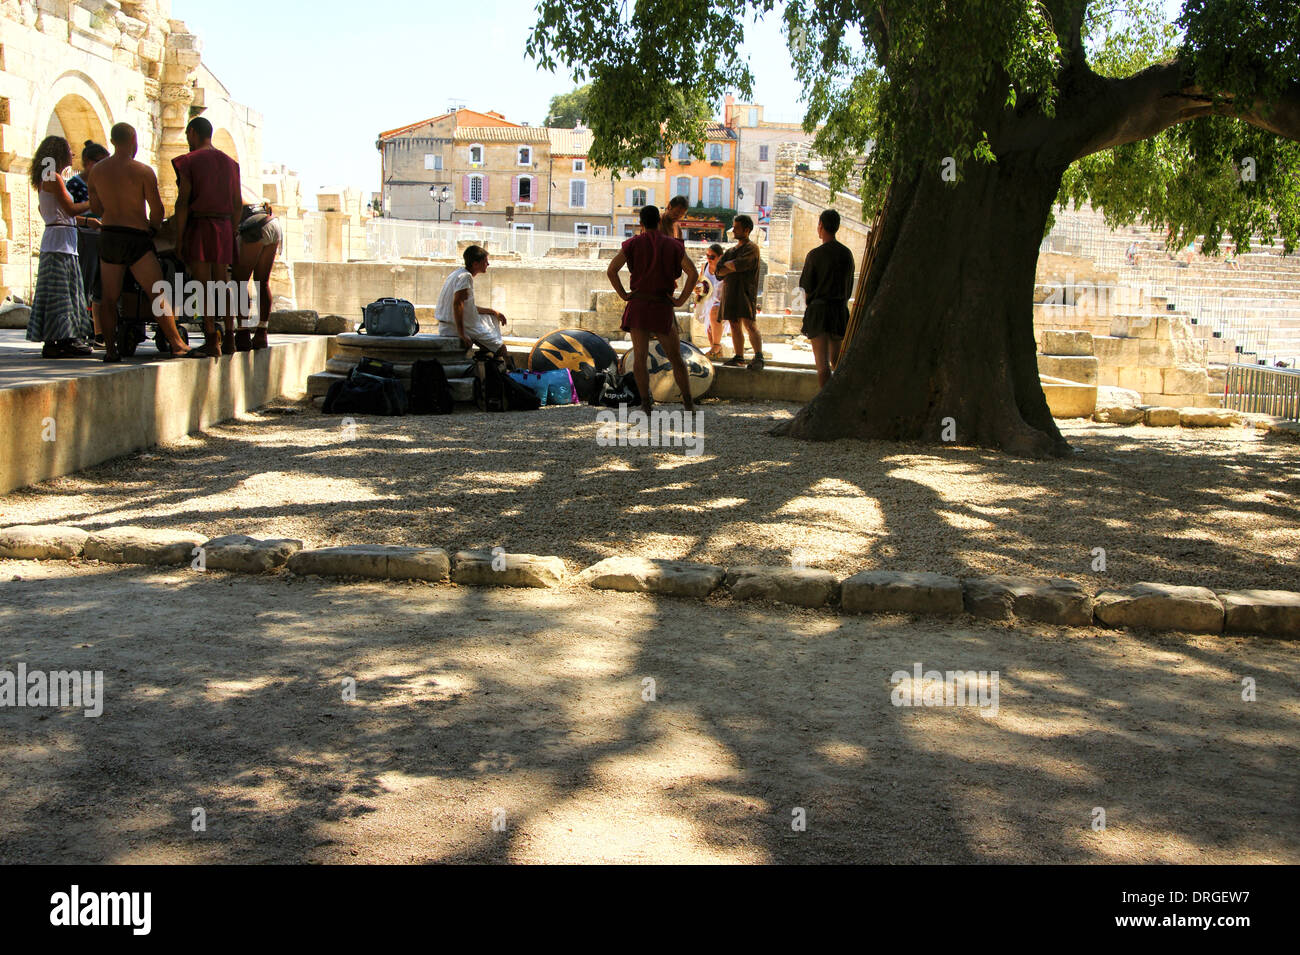 Players on a break at the ancient theater 'of Arle which was built at the end of the 1st  century BC. AD Stock Photo